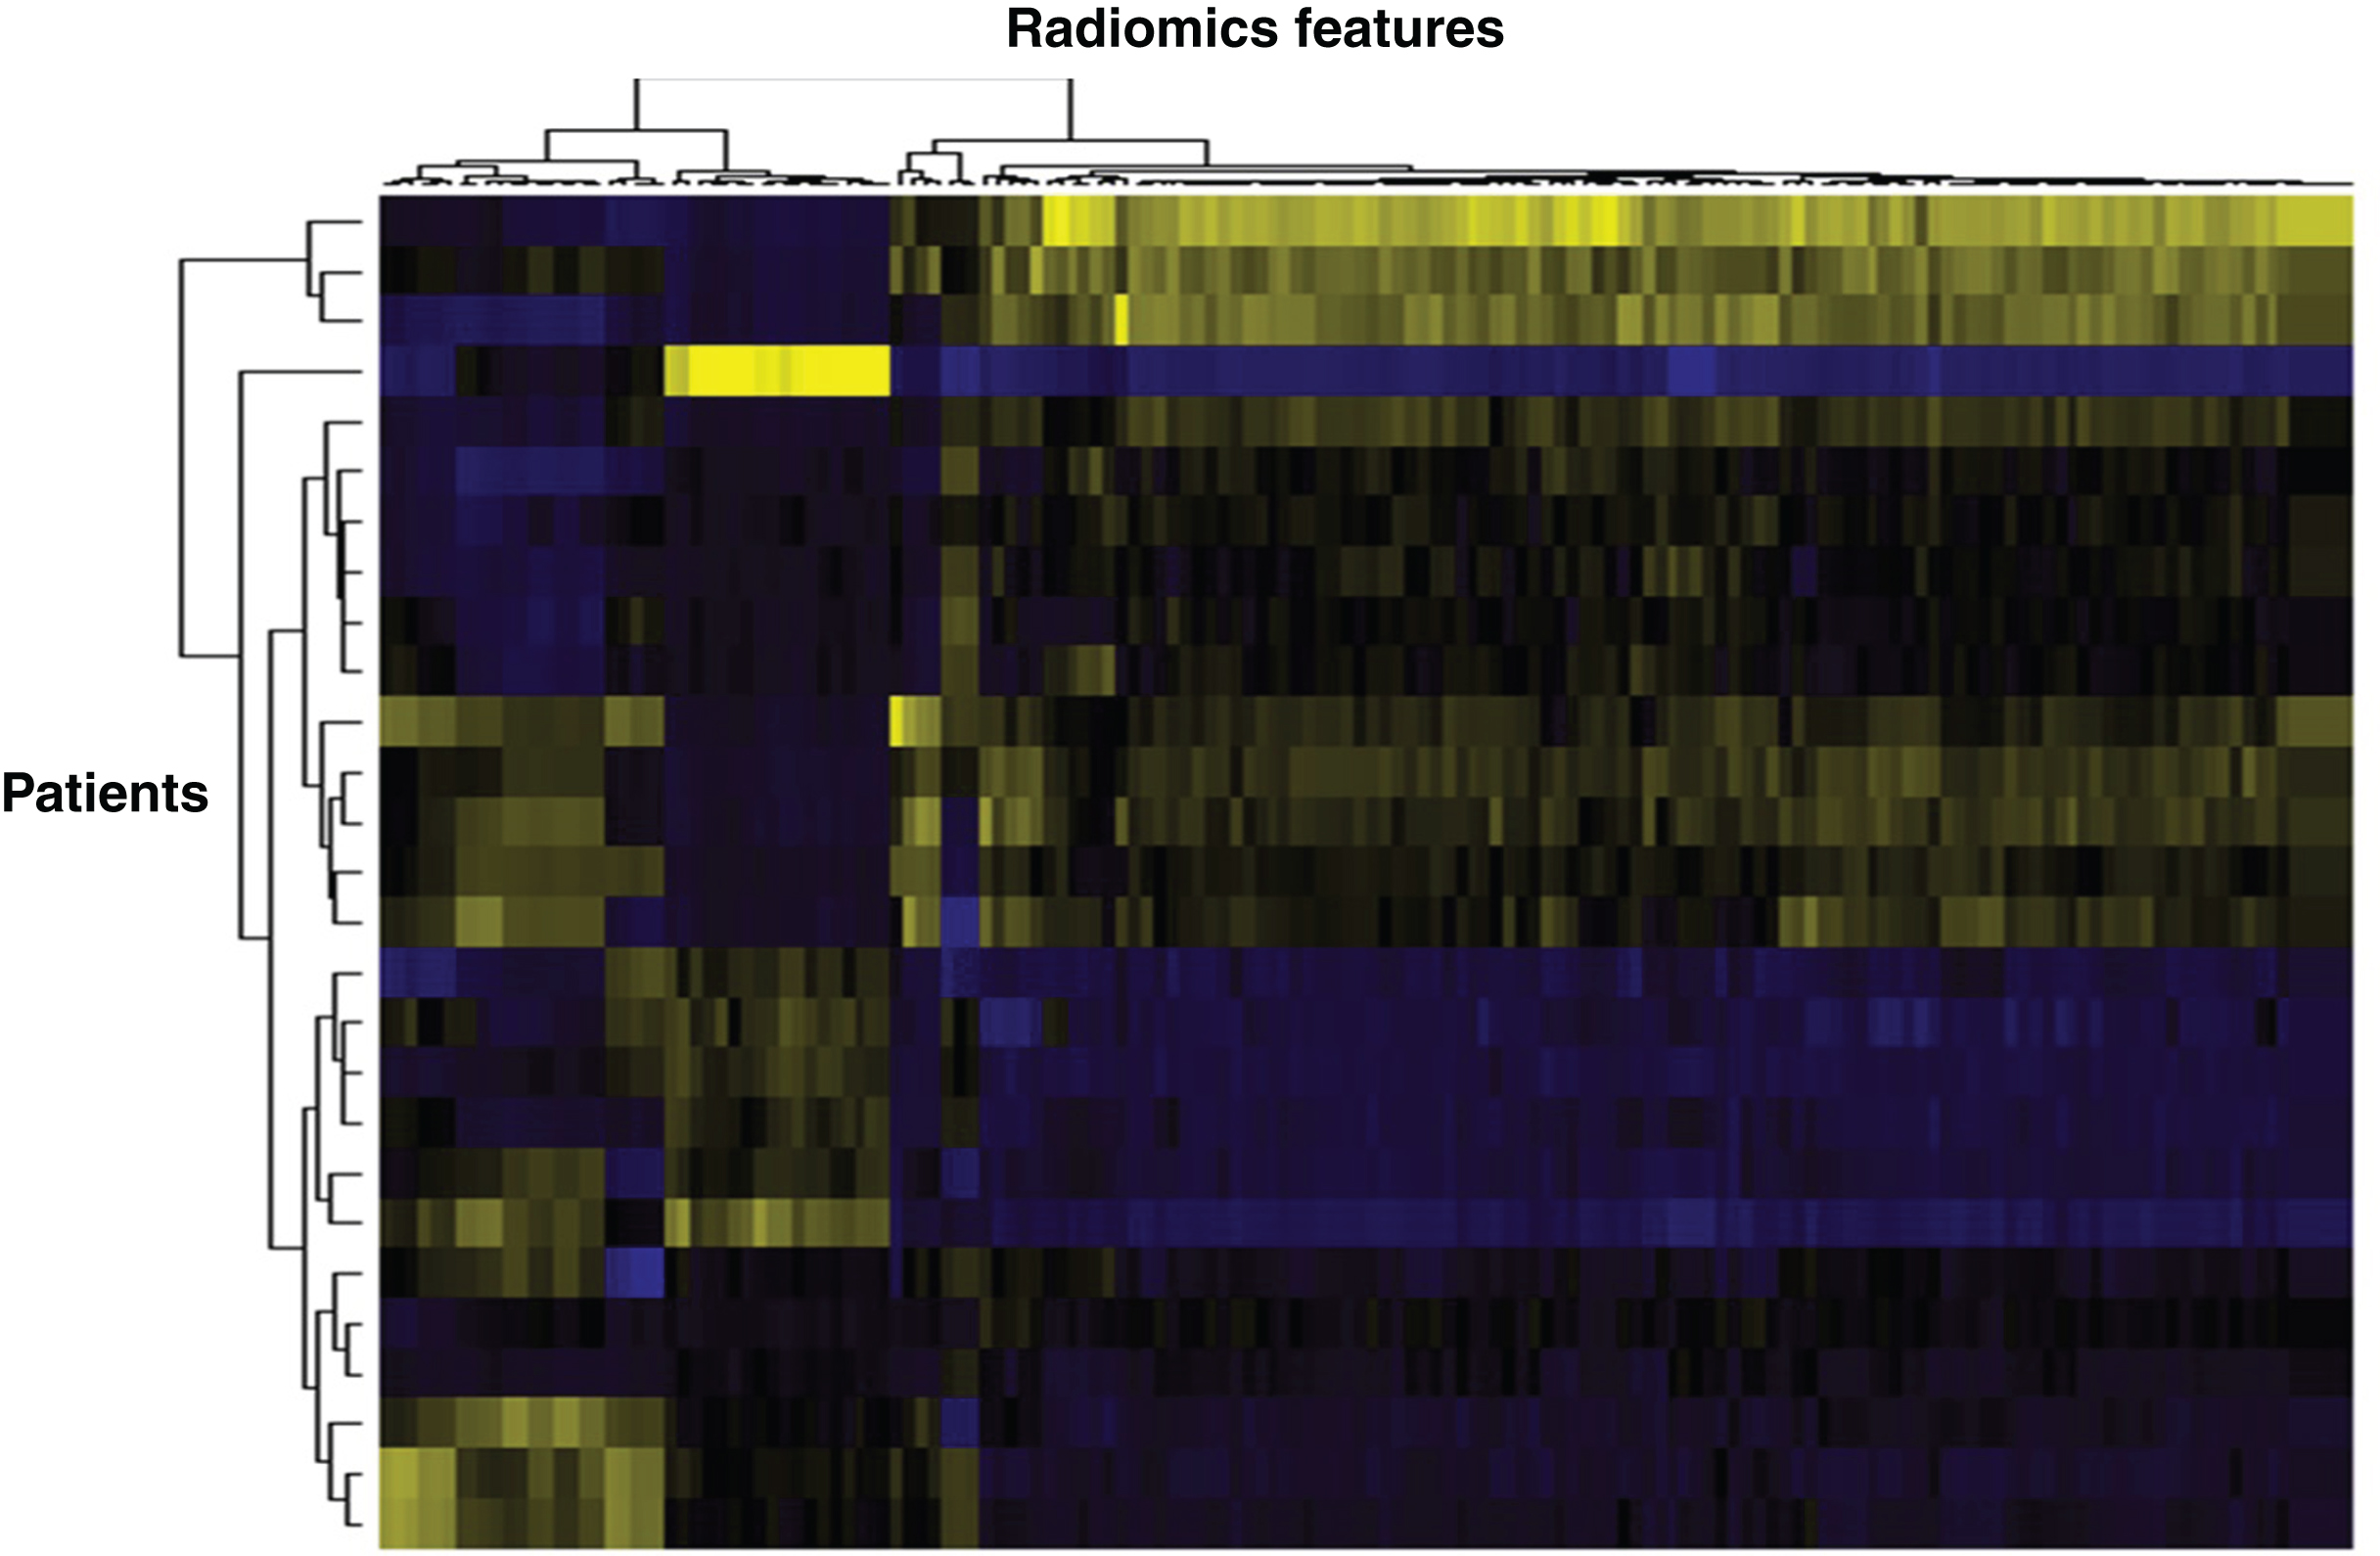 Heat map based on radiomics features extracted from mRCC patients. Vertically is represented each patient, horizontally each radiomics feature. Such heat maps allow separating patients according to common radiomics profiles, which are then correlated to a given outcome.